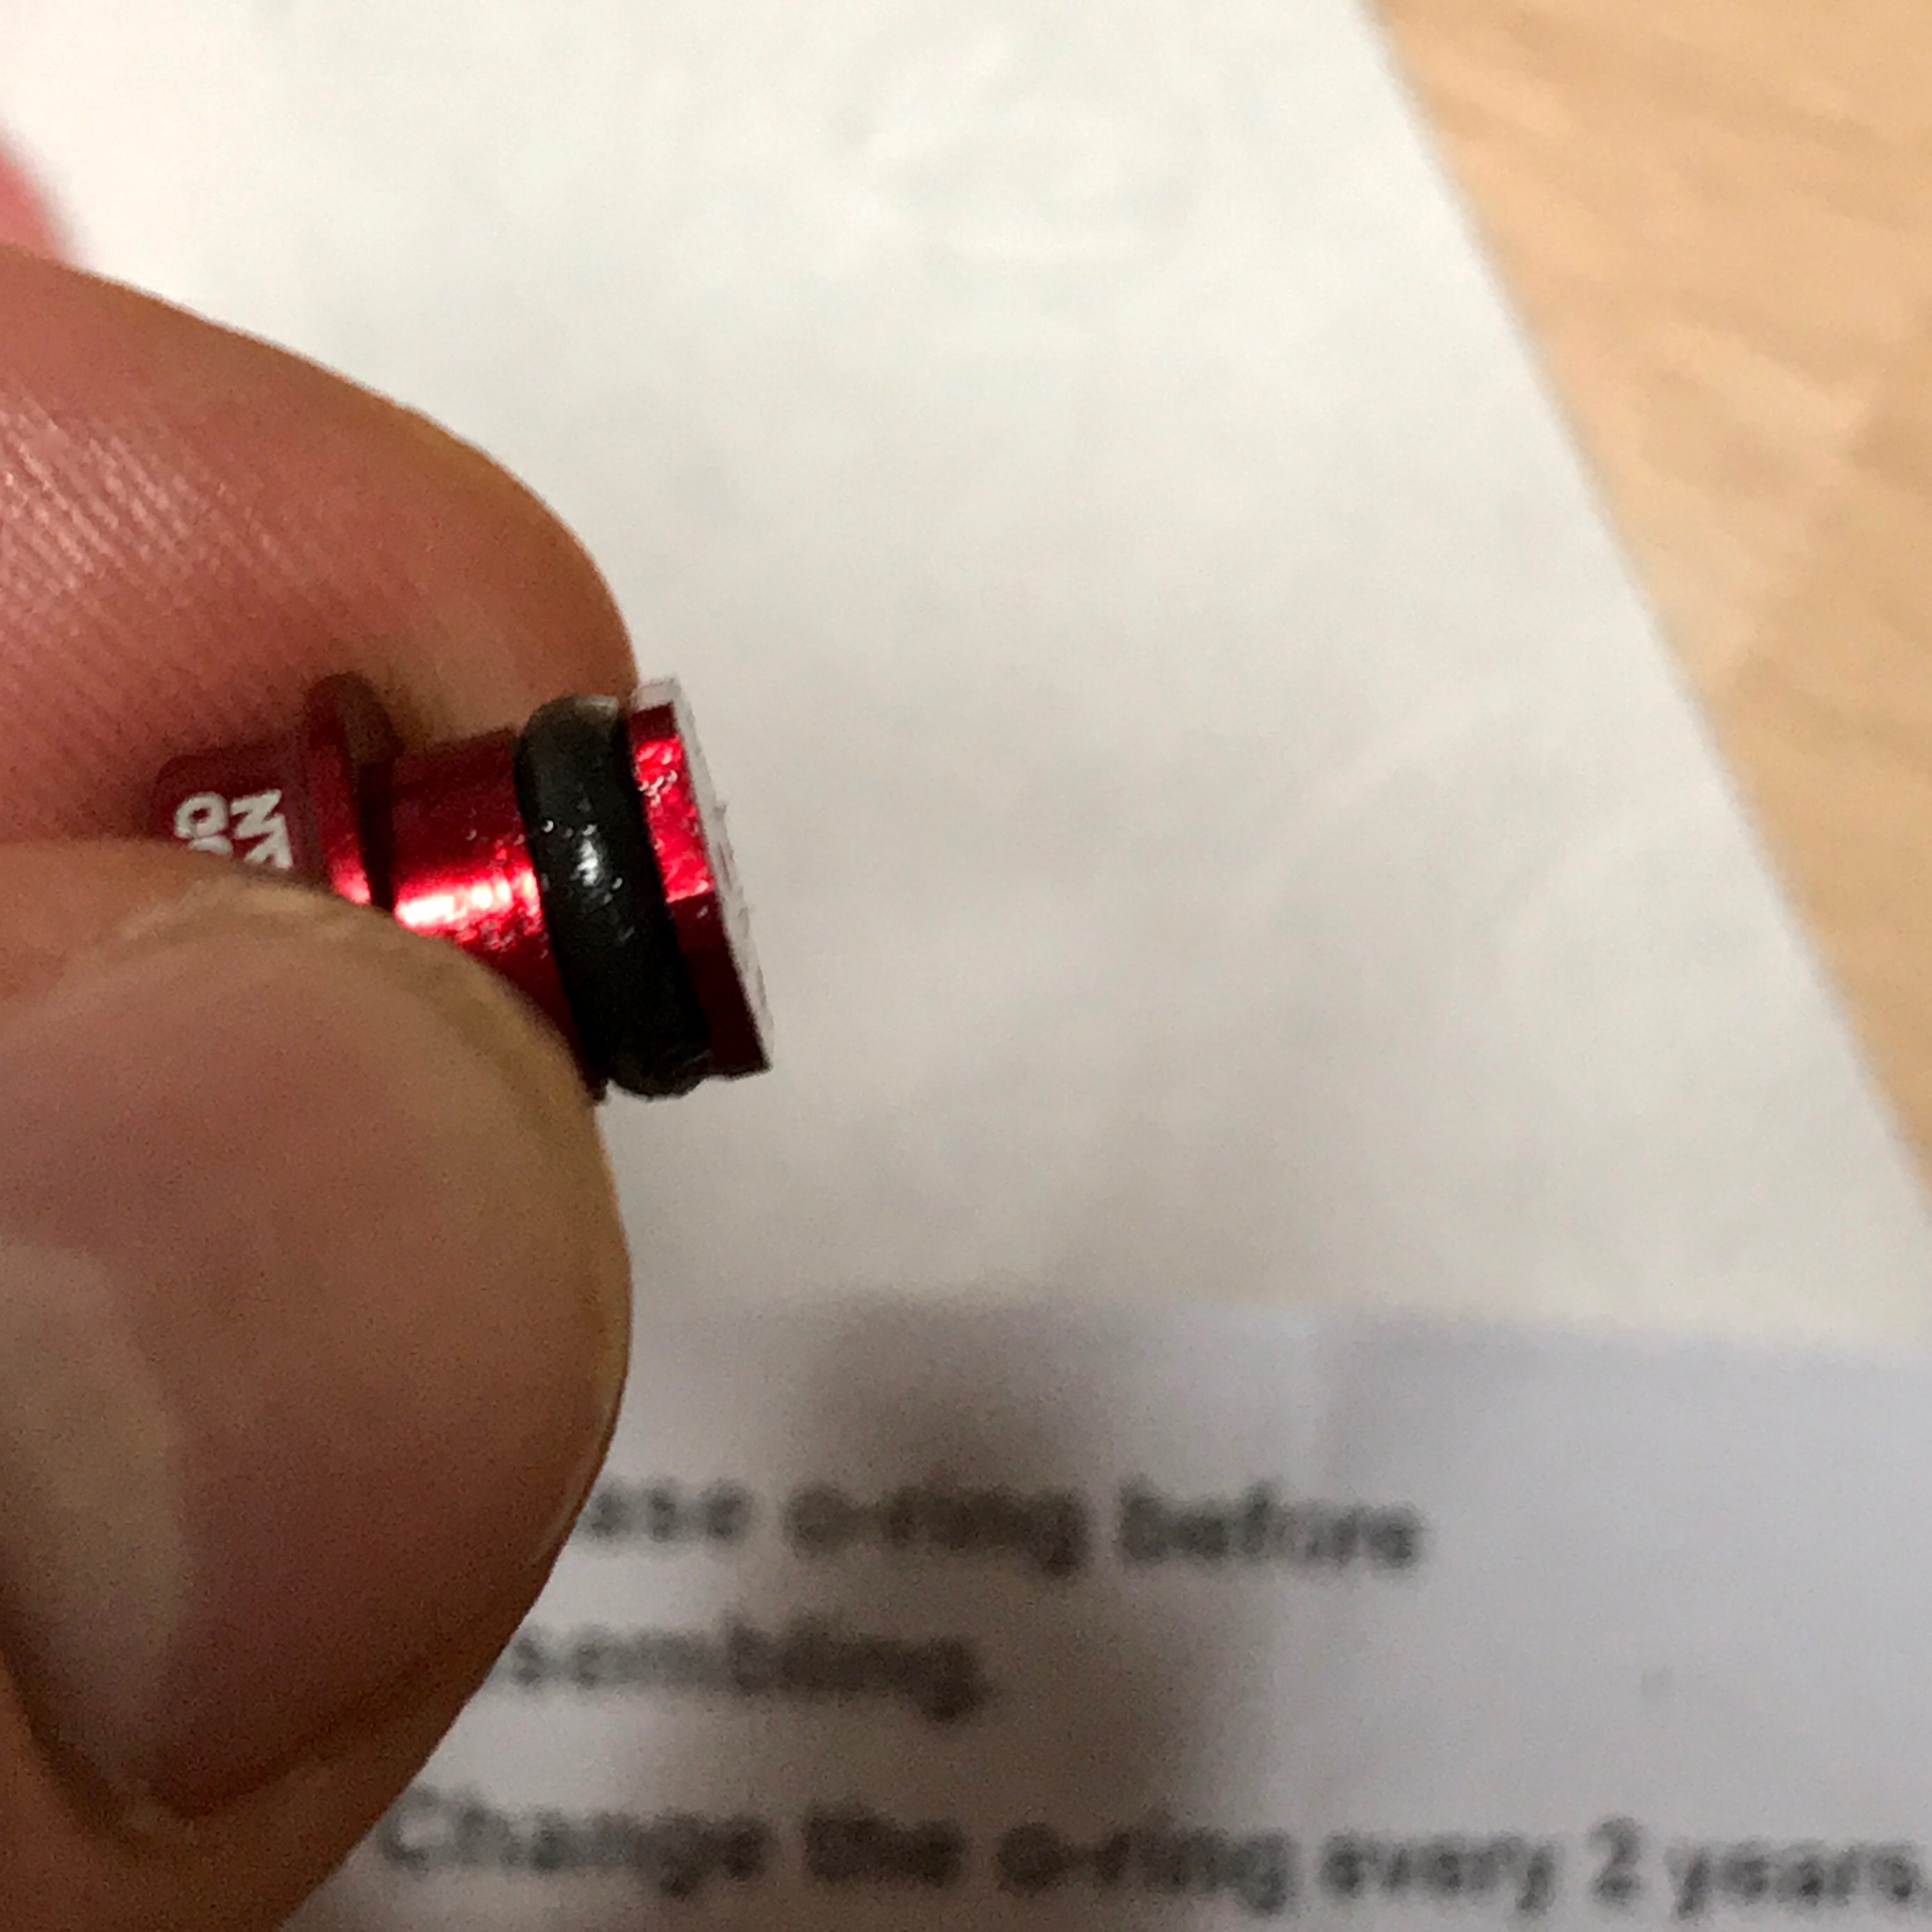 Repairs in Red, Part 2 — Cadence Anodized